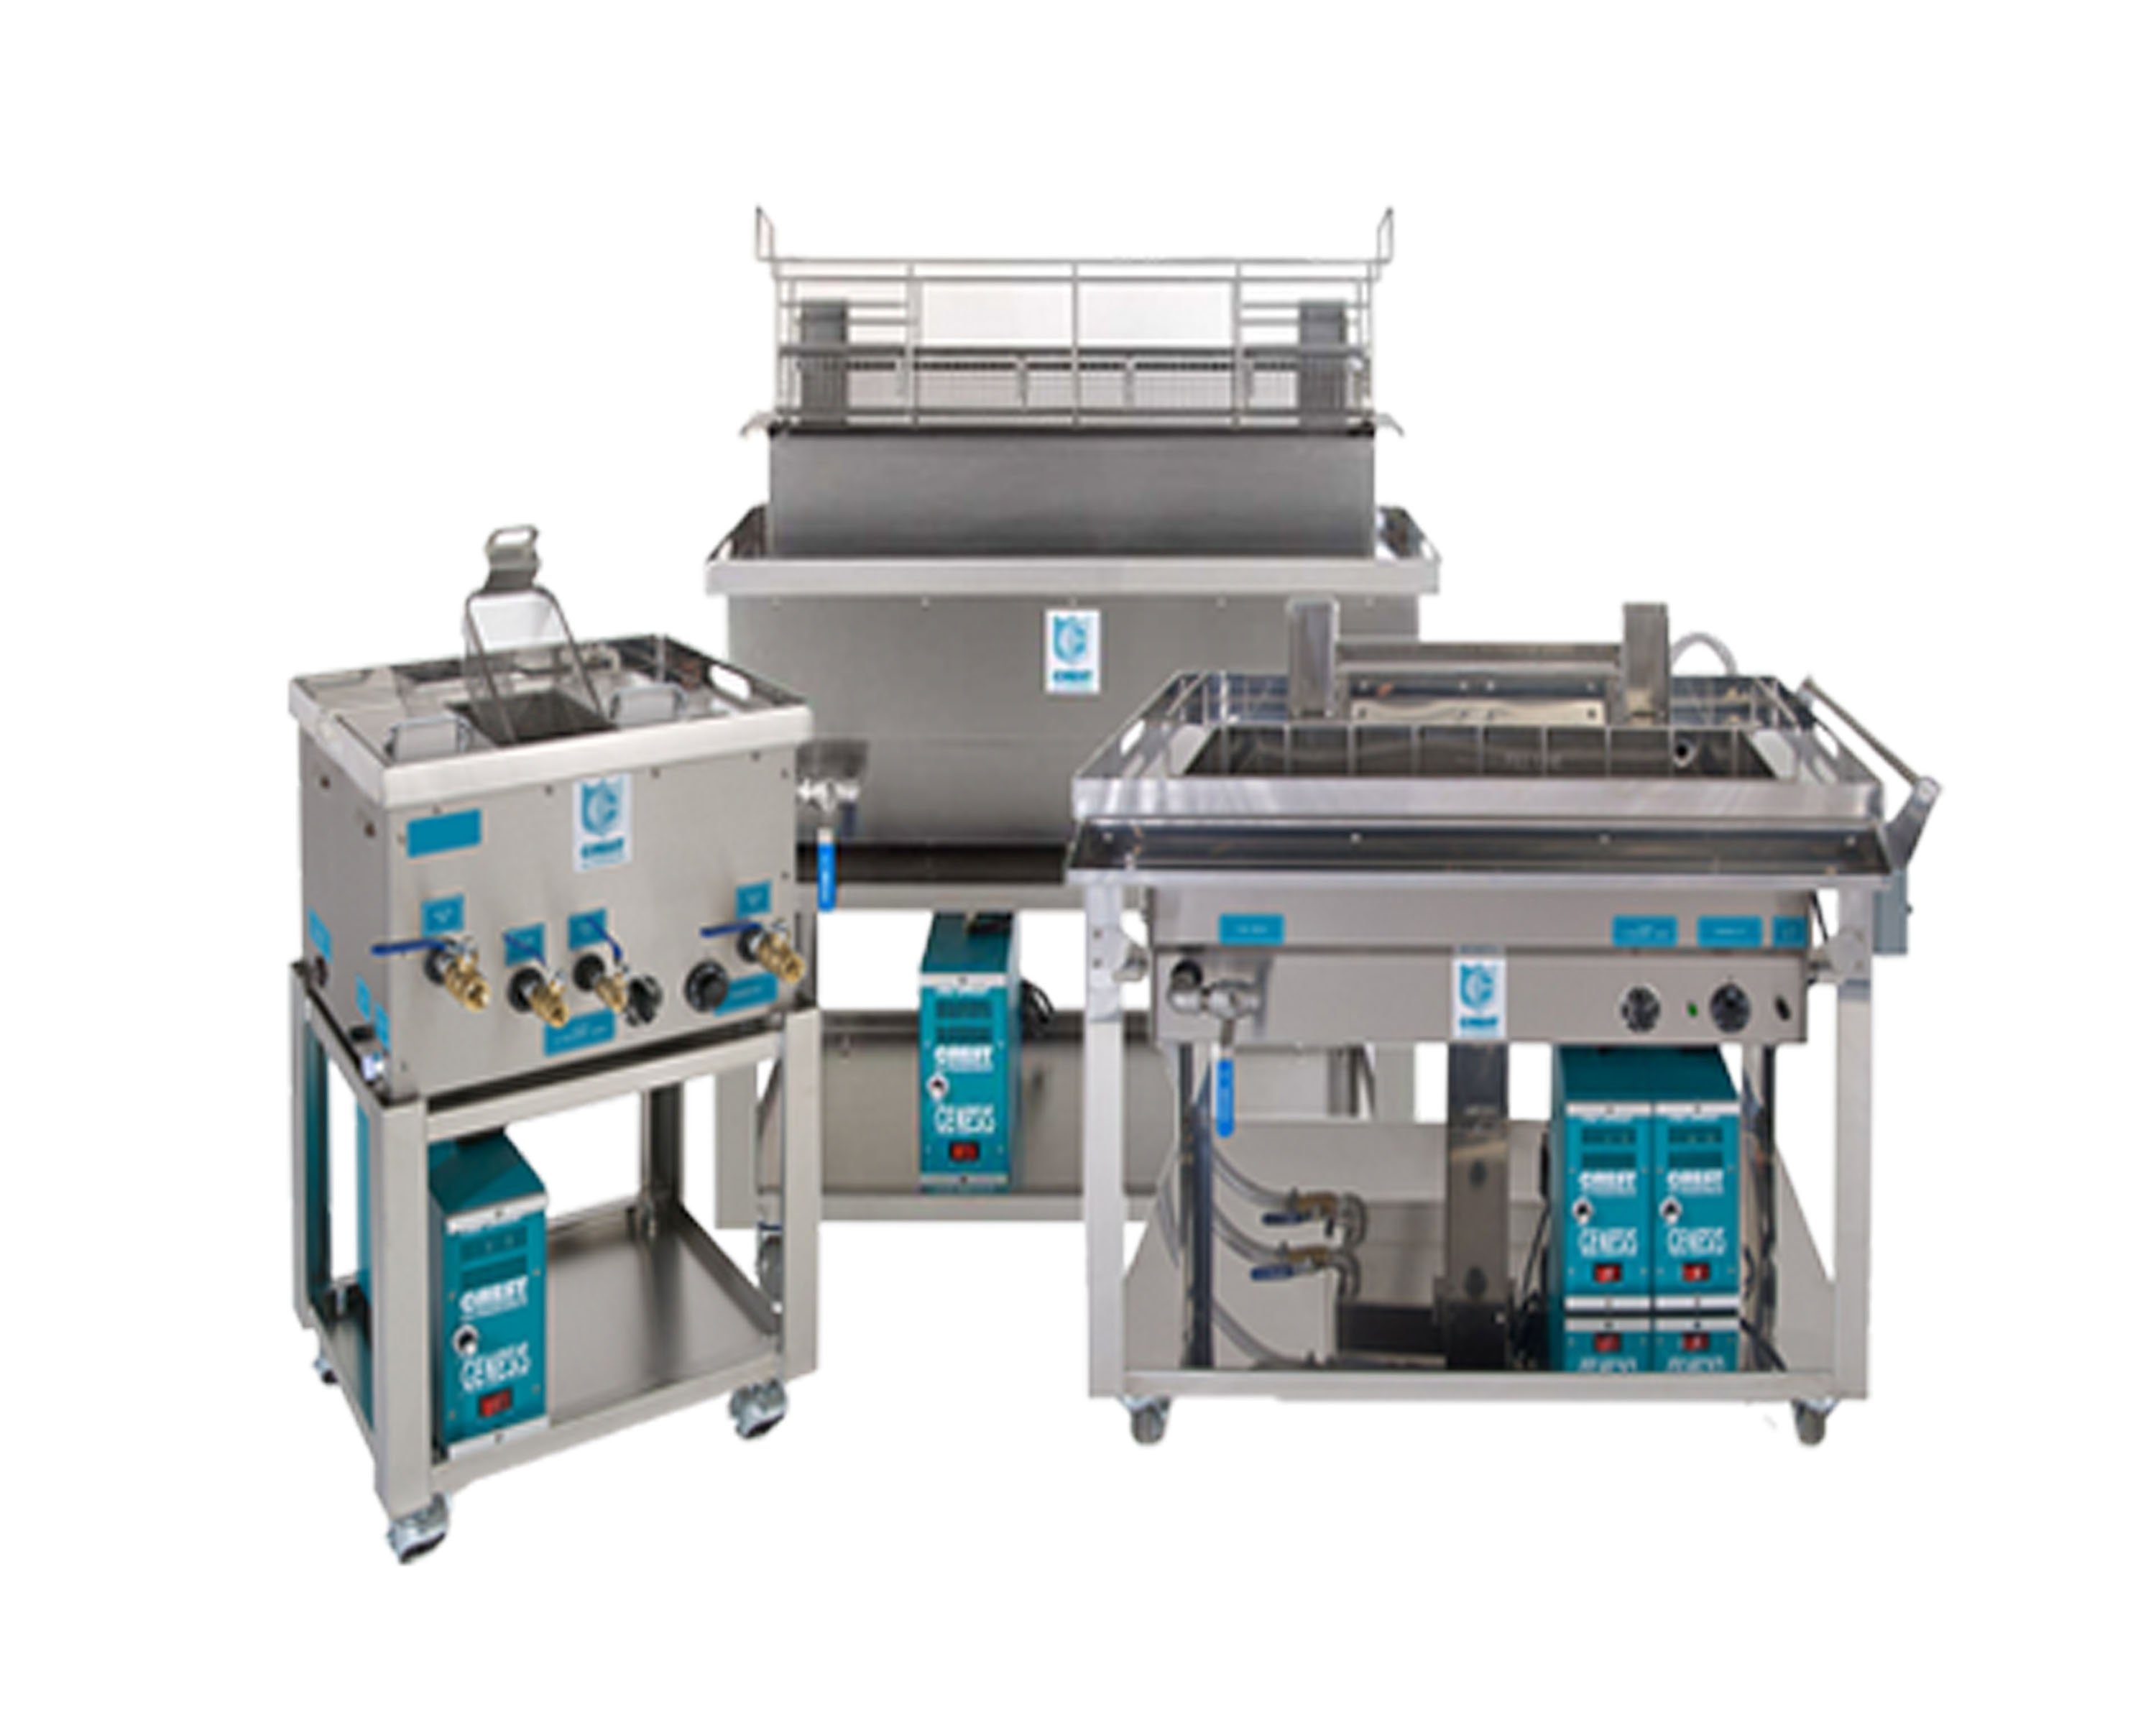 CG Ultrasonic Cleaning Systems